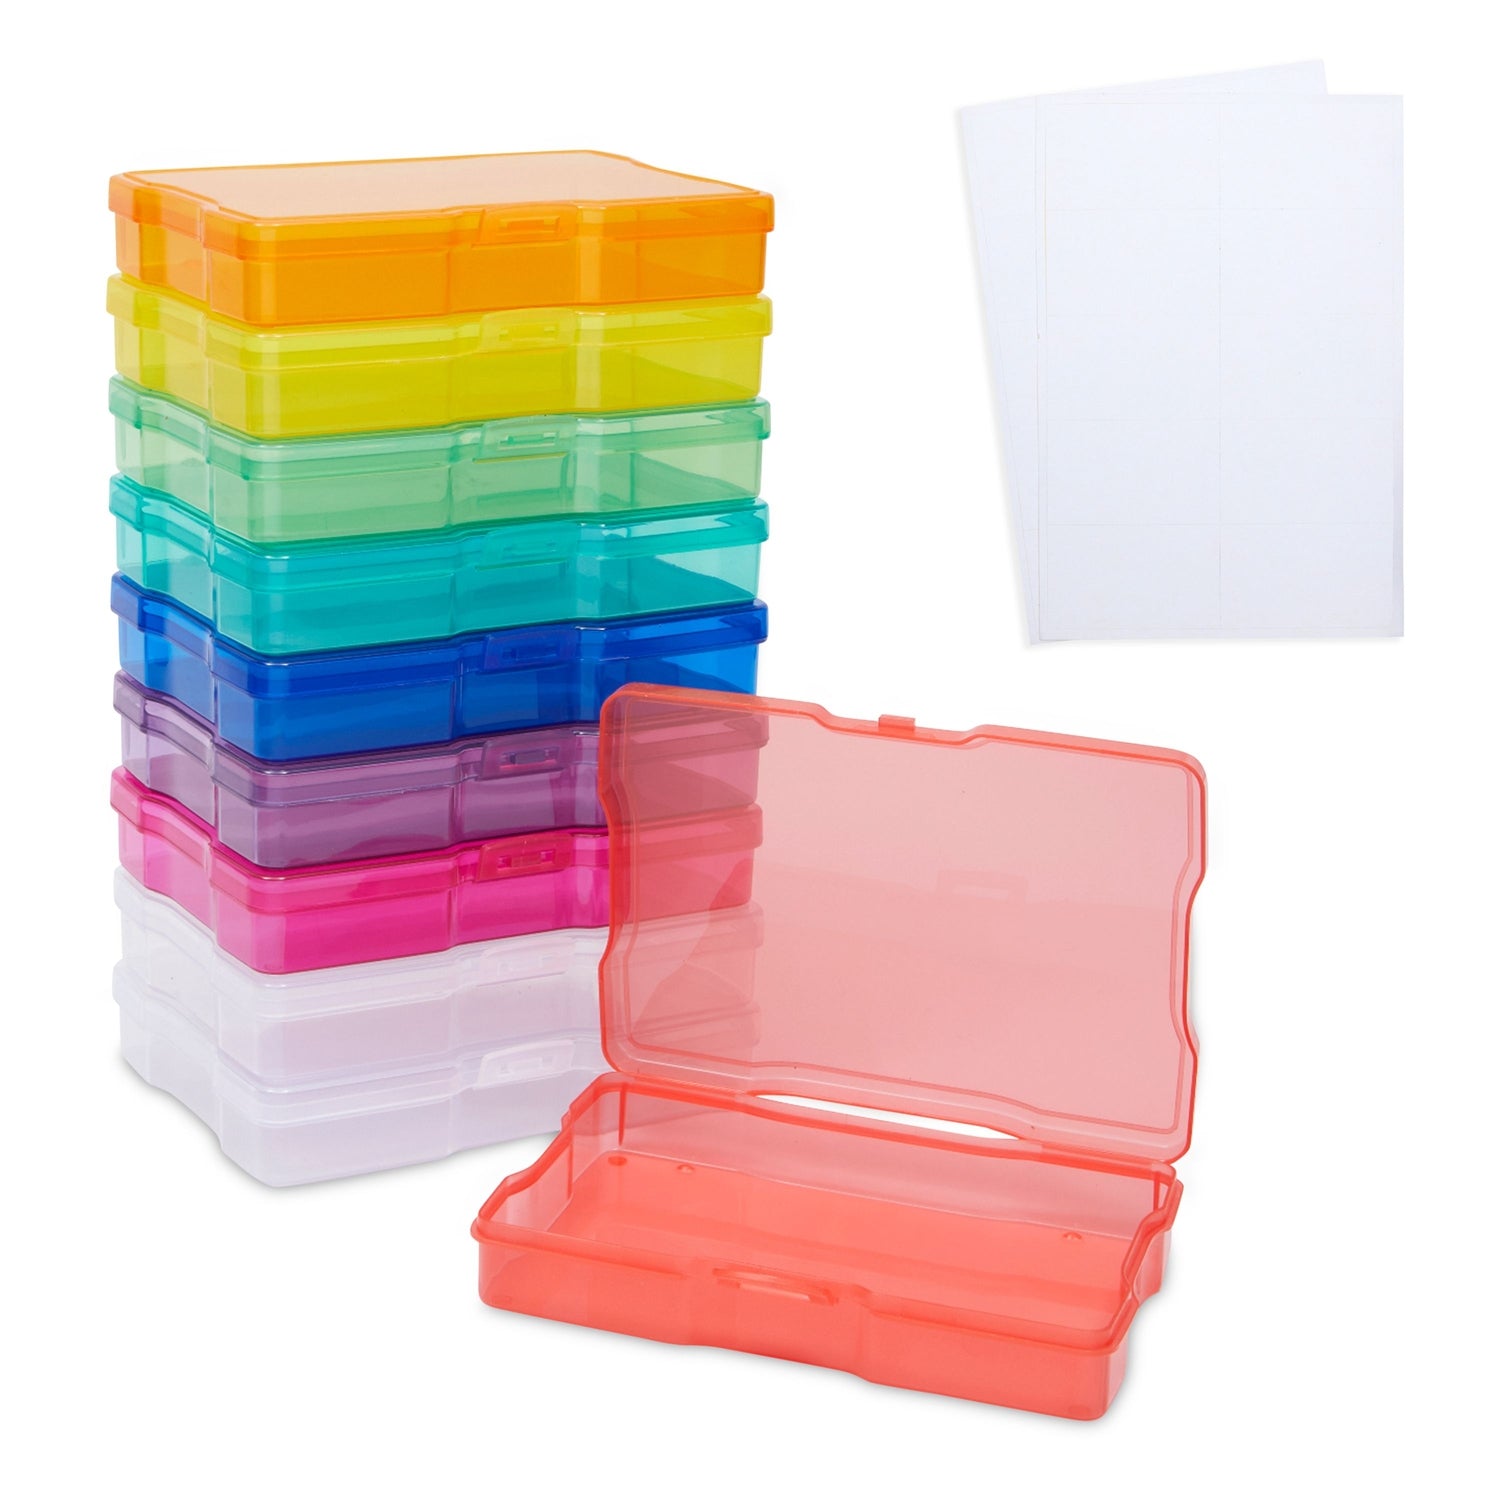 16 Transparent 4x6 Photo Storage Boxes and Organizer with Handle